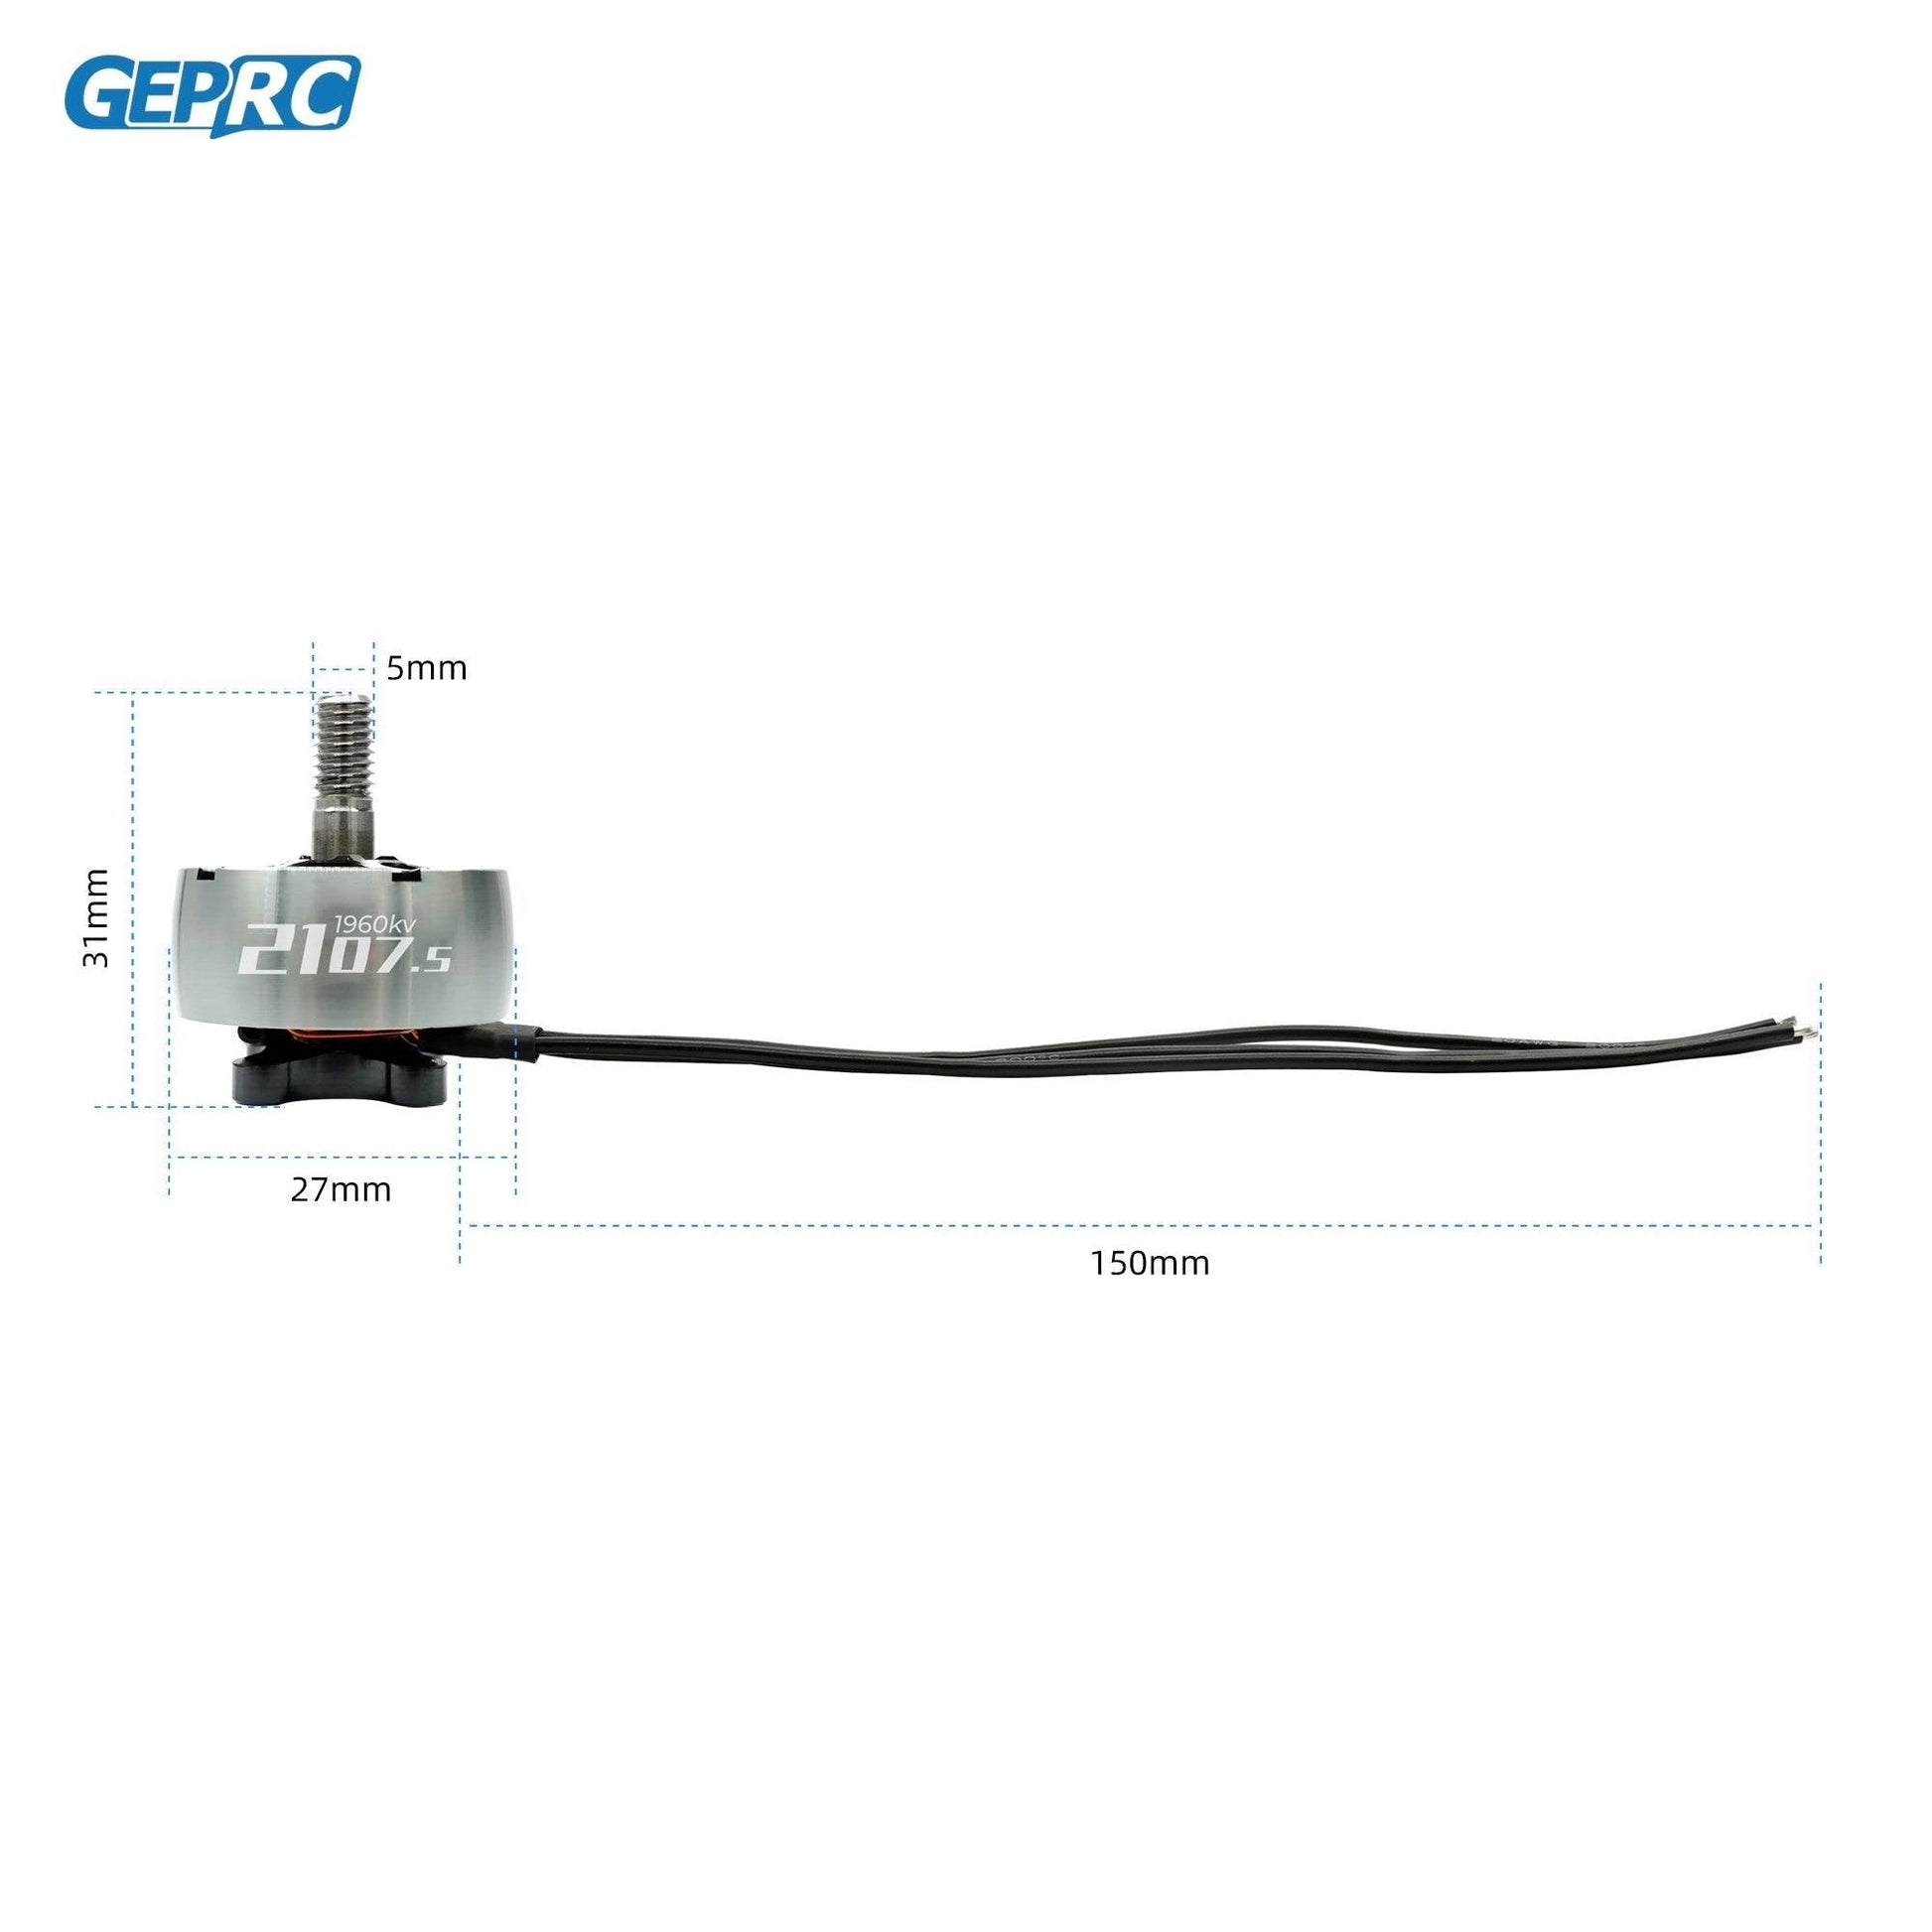 GEPRC SPEEDX2 Motor - 2107.5 1960KV/2450KV Motor Suitable For DIY RC FPV Quadcopter Freestyle Racing Drone Accessories Replacement Parts - RCDrone